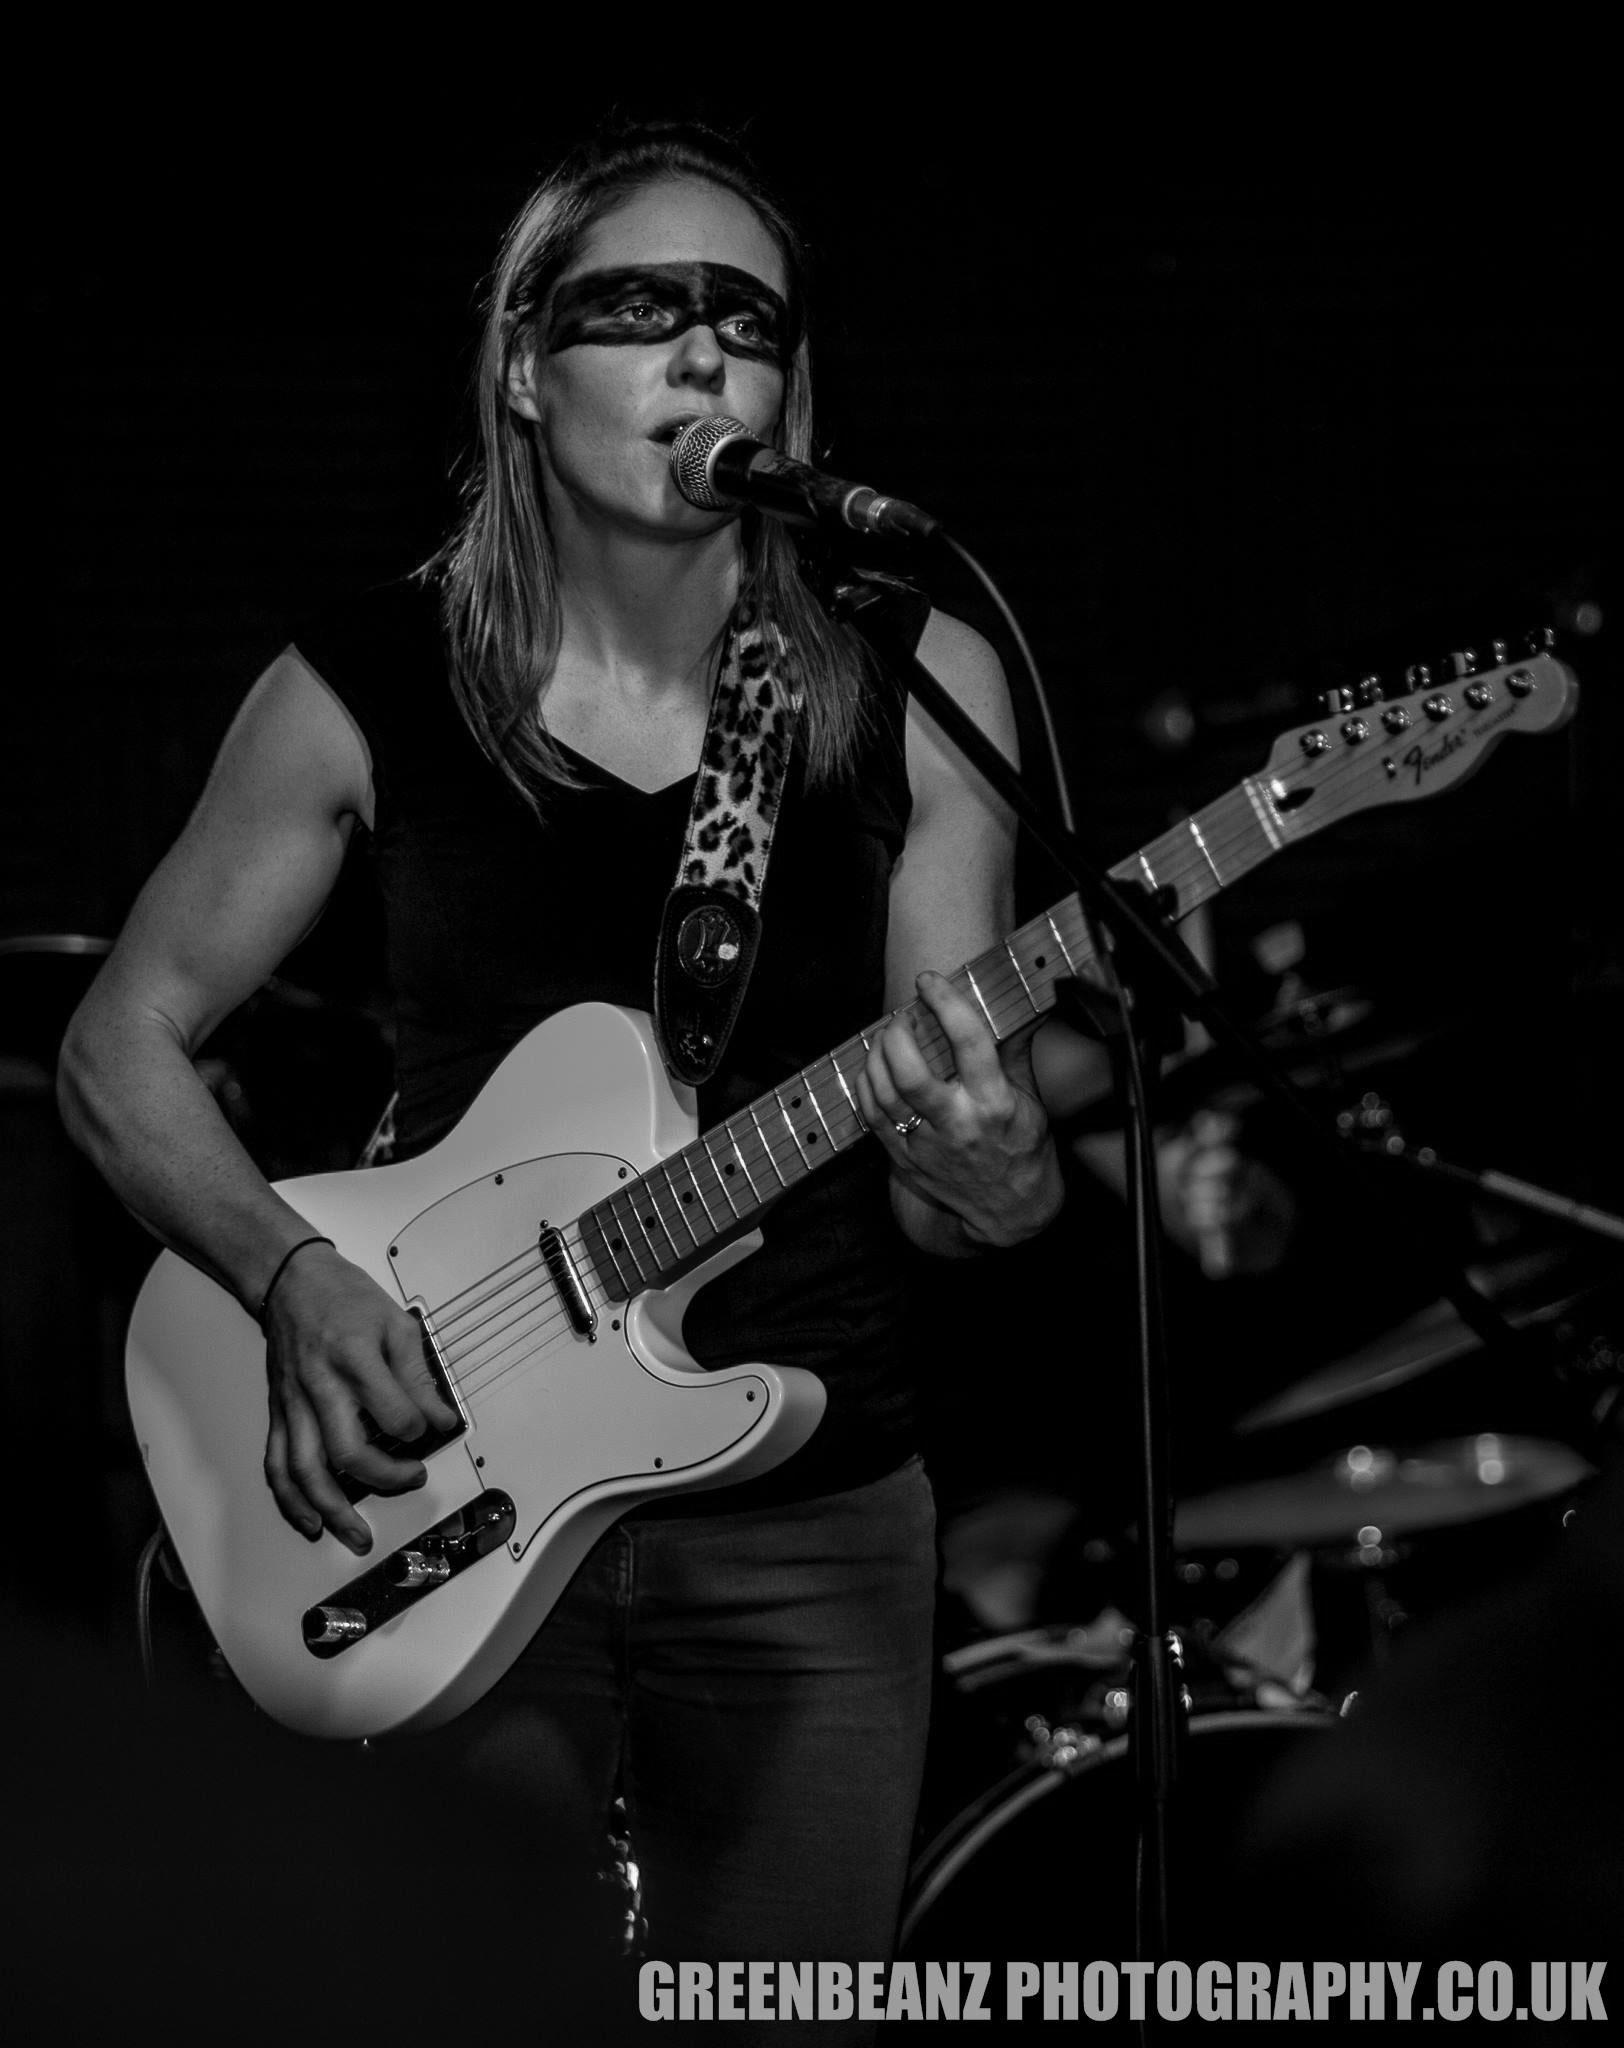 Sharon Kellaway weilds her telecaster live. She has the chops that help define The Eyelids sound.